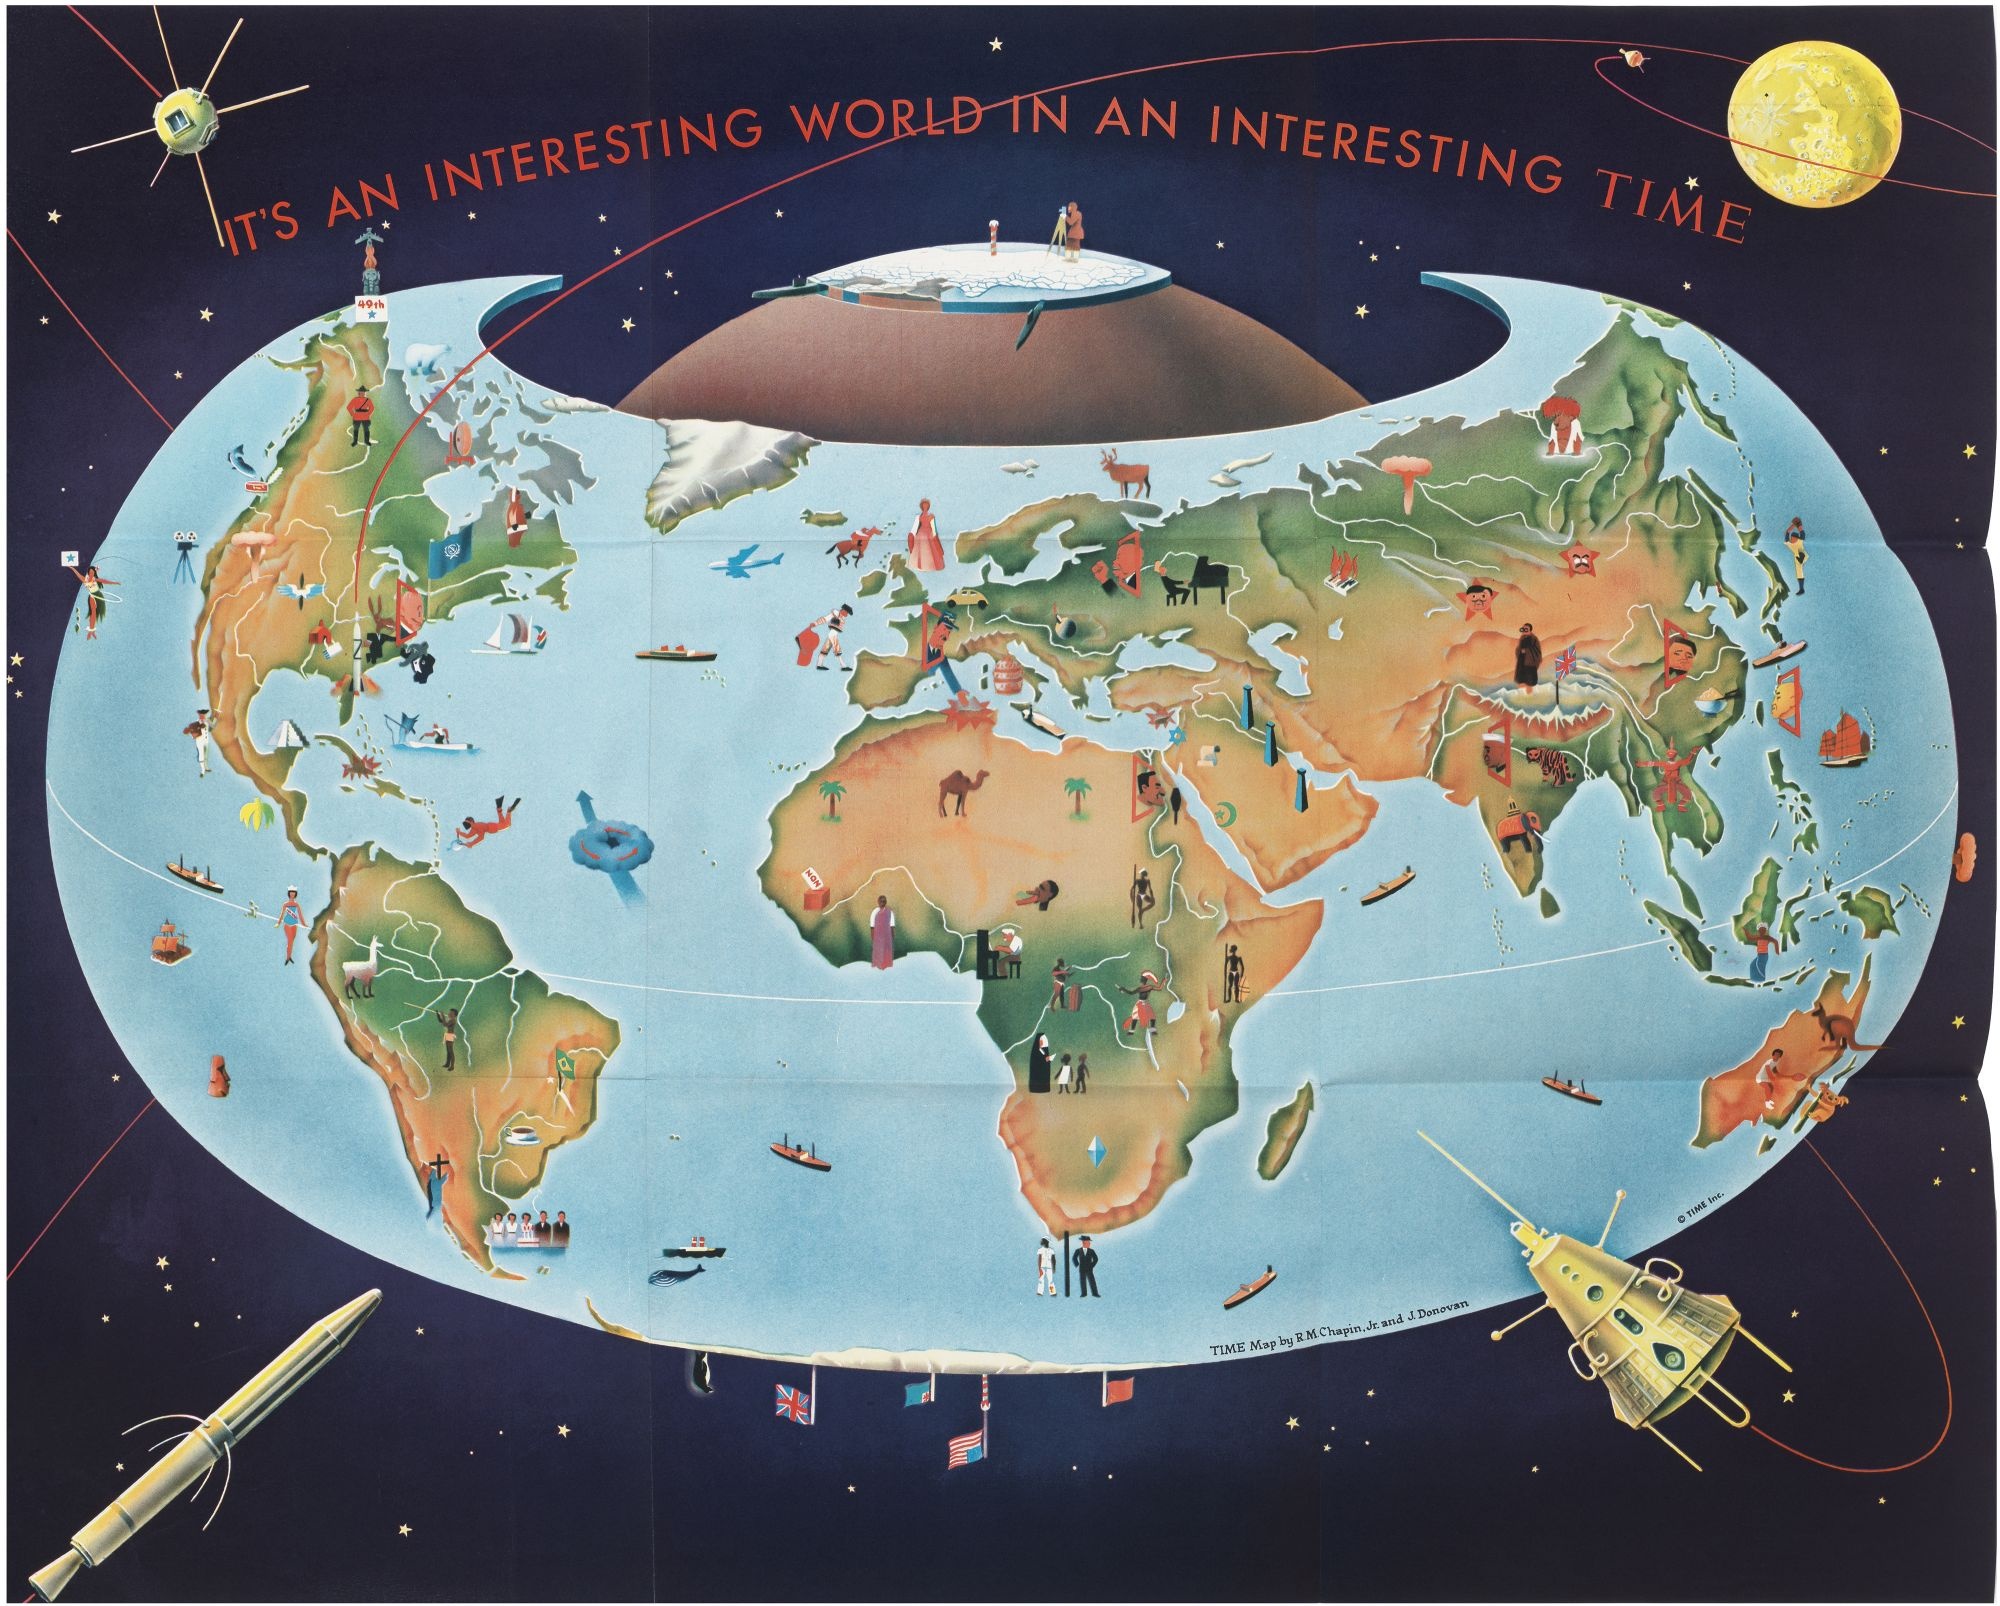 Subscribers to Time Magazine would have received this map in 1959.